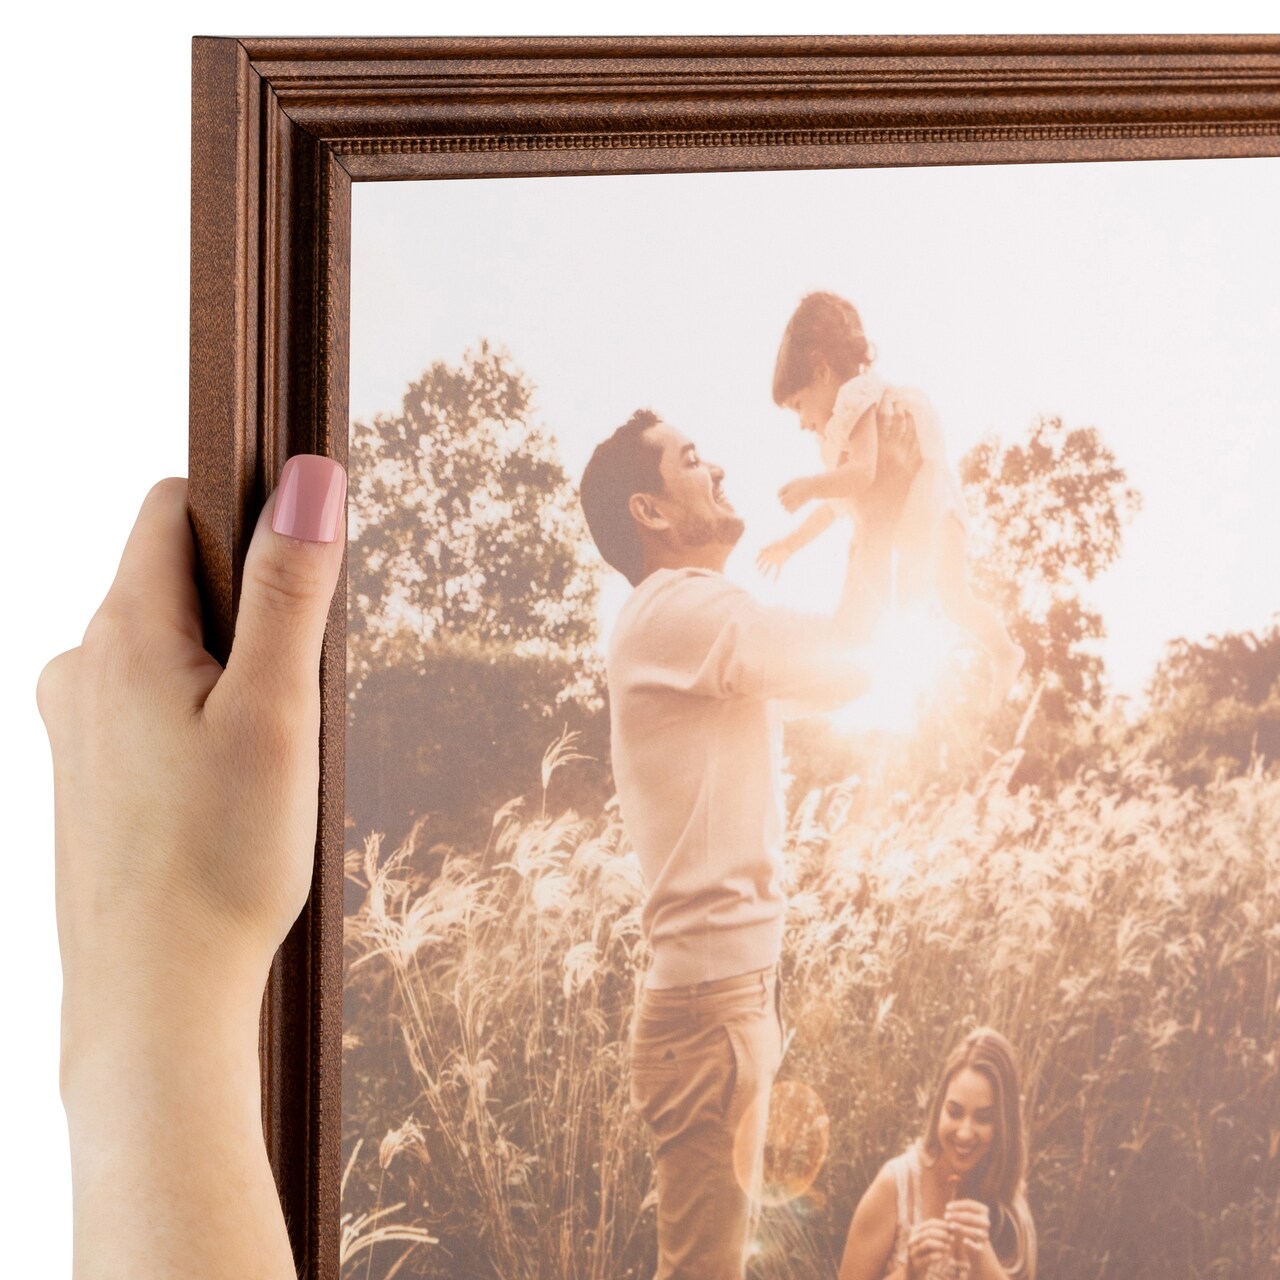 ArtToFrames 14x26 Inch  Picture Frame, This 1.25 Inch Custom Wood Poster Frame is Available in Multiple Colors, Great for Your Art or Photos - Comes with 060 Plexi Glass and  Corrugated Backing (A17KL)